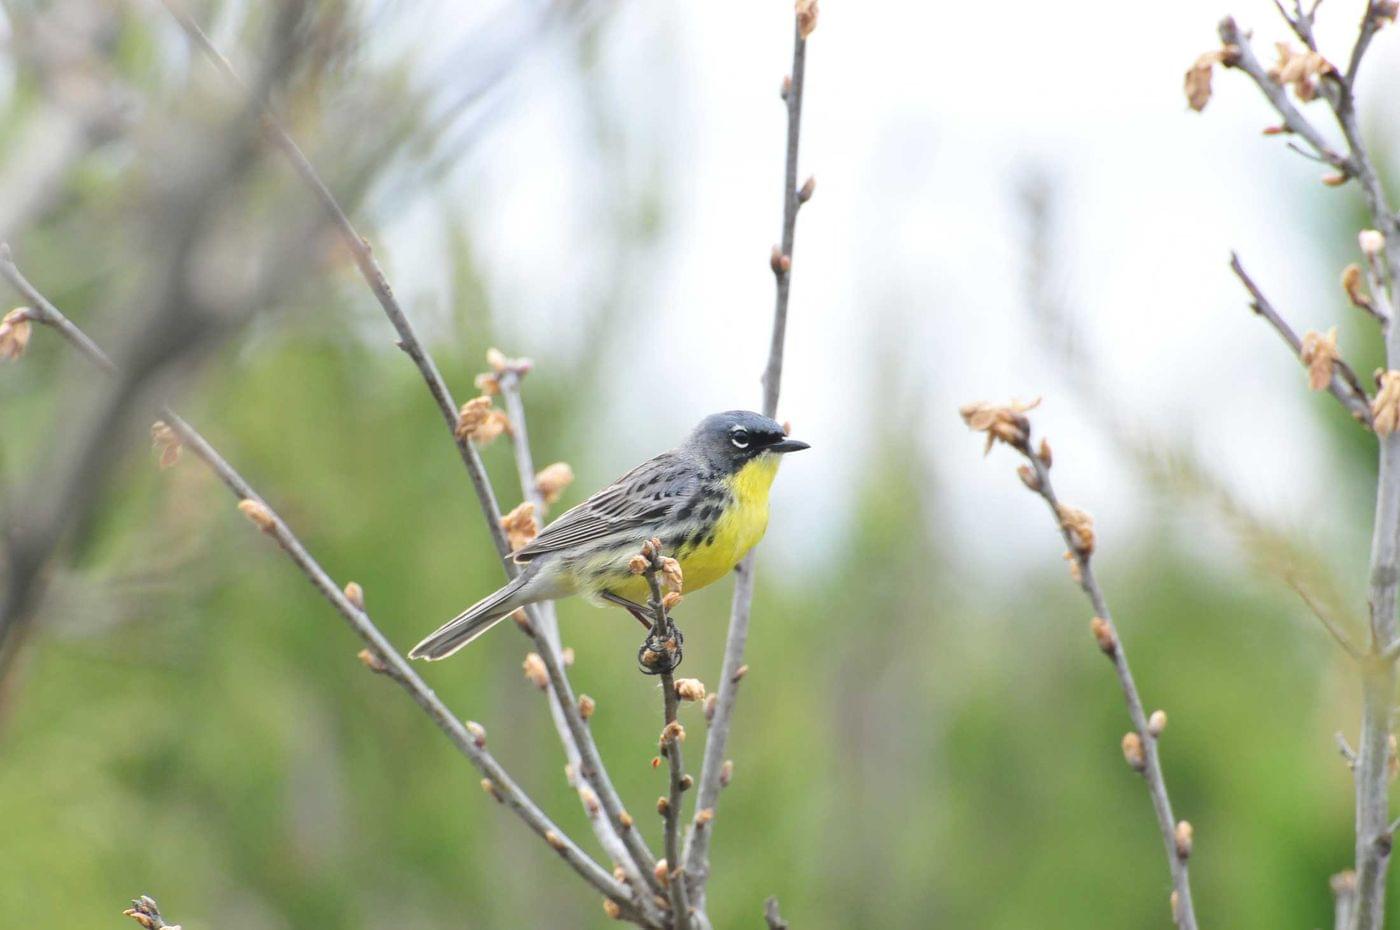 This warbler doesn't mind being referred to as a dinosaur.  (Image: U.S. Fish and Wildlife Service)